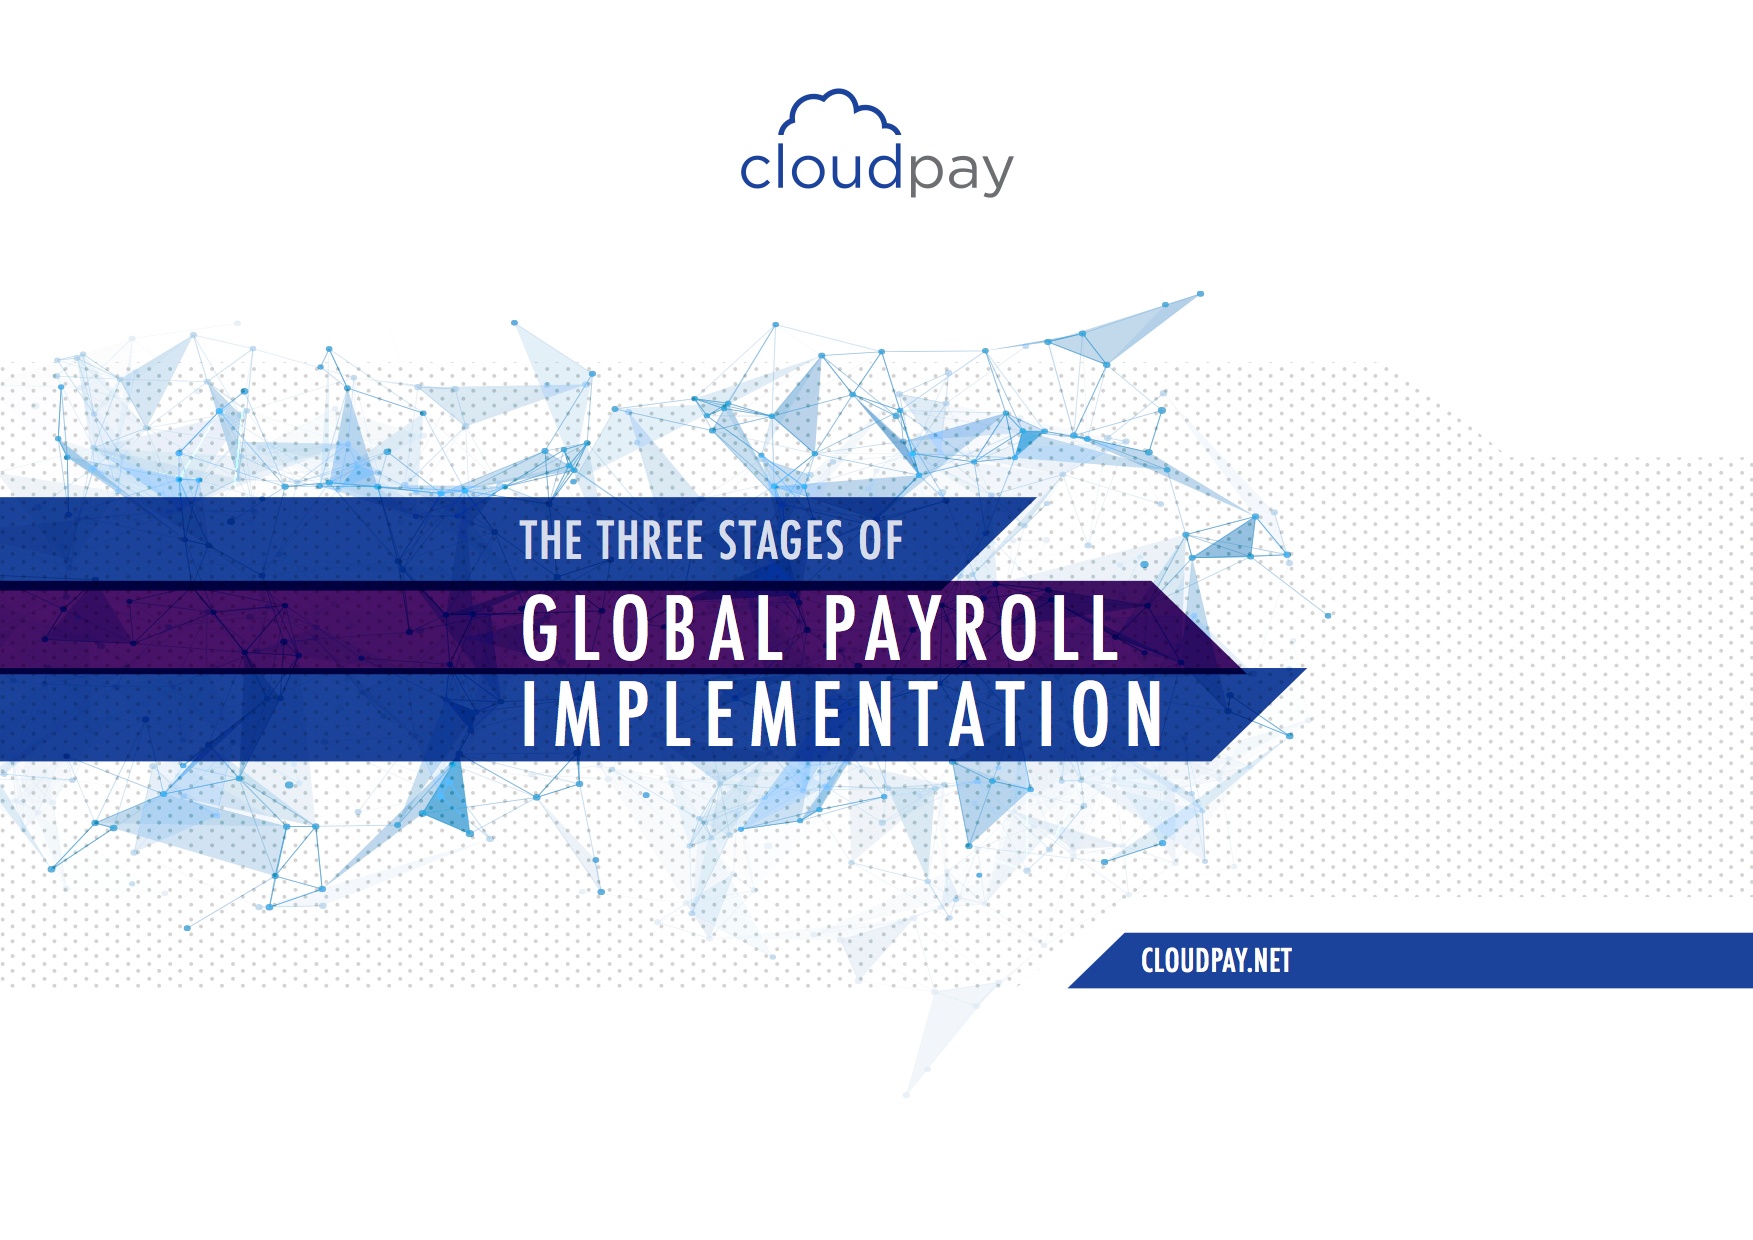 The 3 Key Stages of Global Payroll Implementation